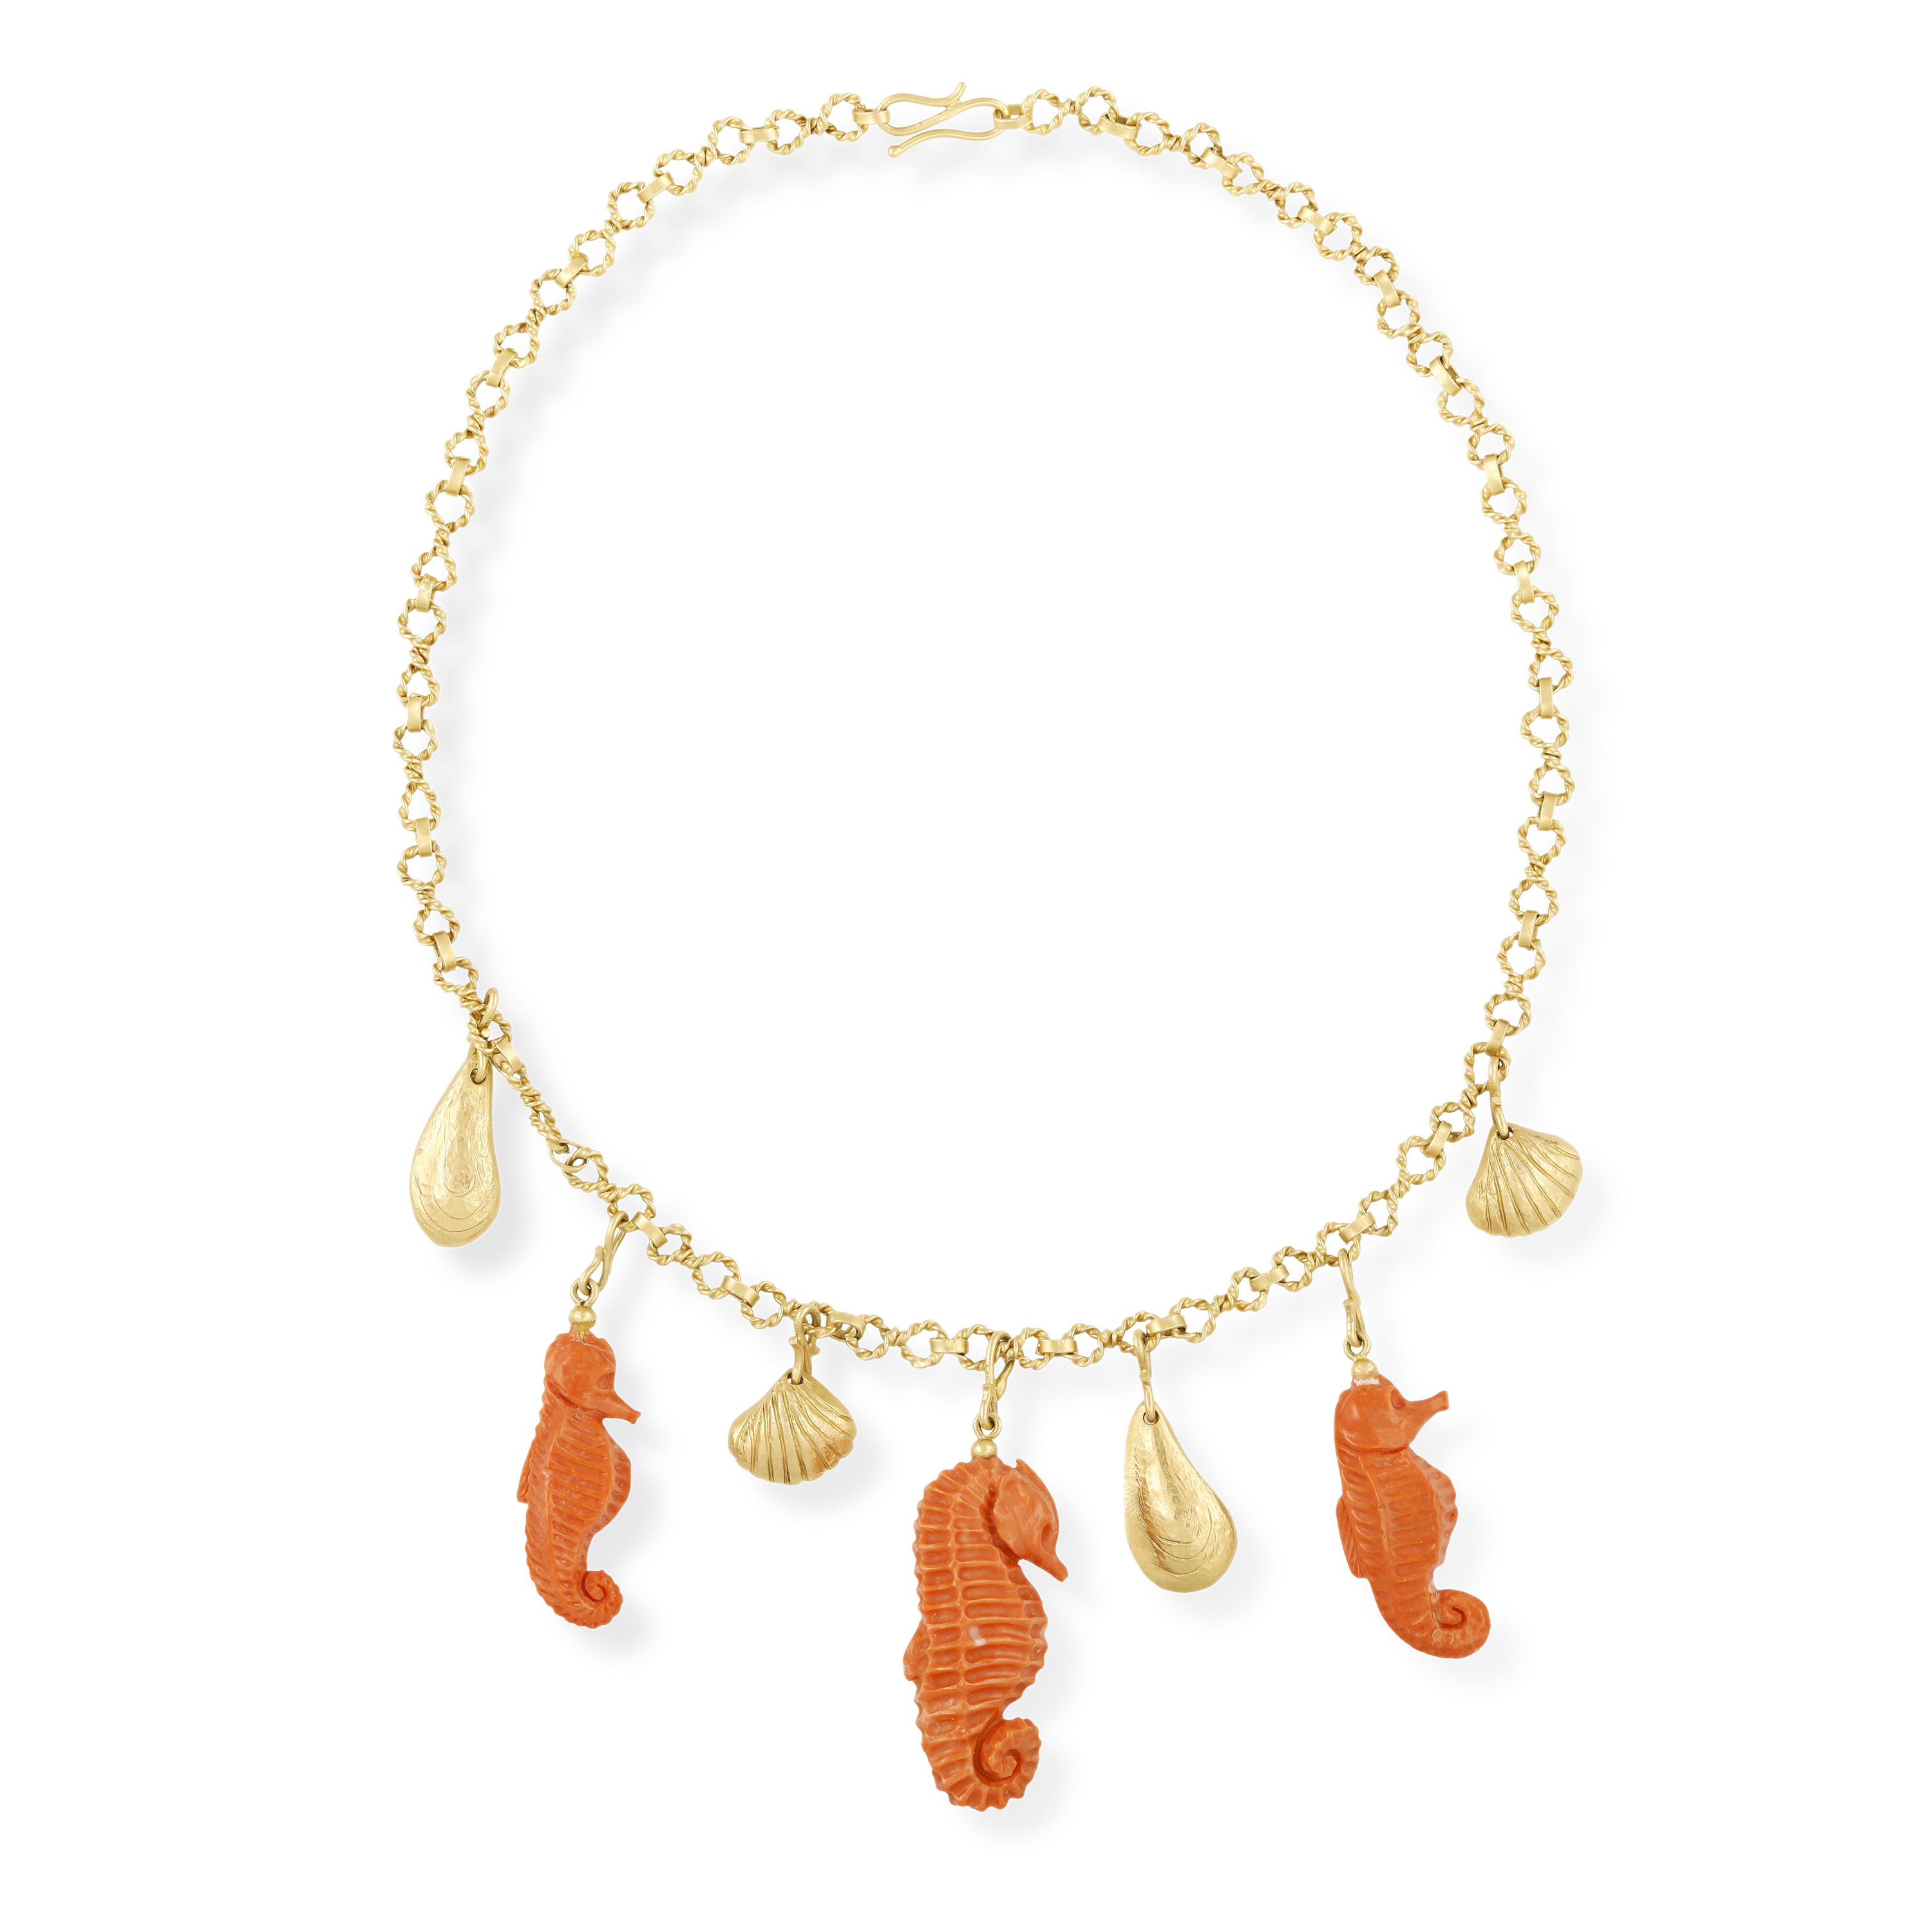 A CORAL AND GOLD CHARM NECKLACE, CIRCA 1960 The fancy-link chain with ropetwist detail suspending